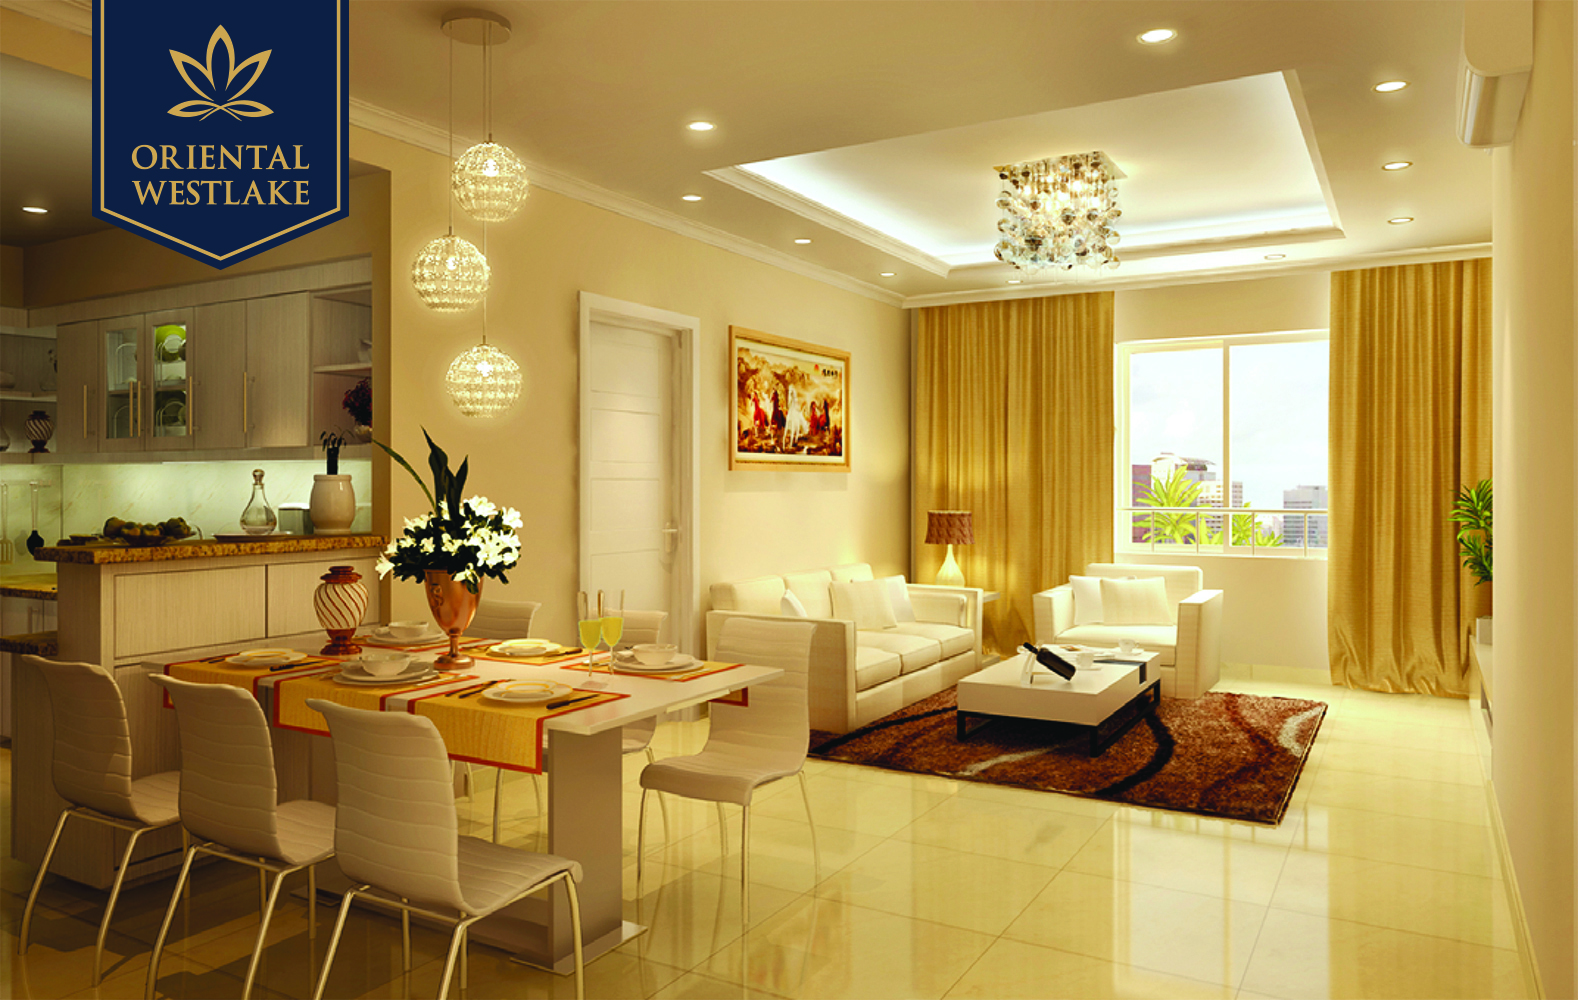 Living space is equipped with high level equipment of famous brands. Hotline: 090 488 6558